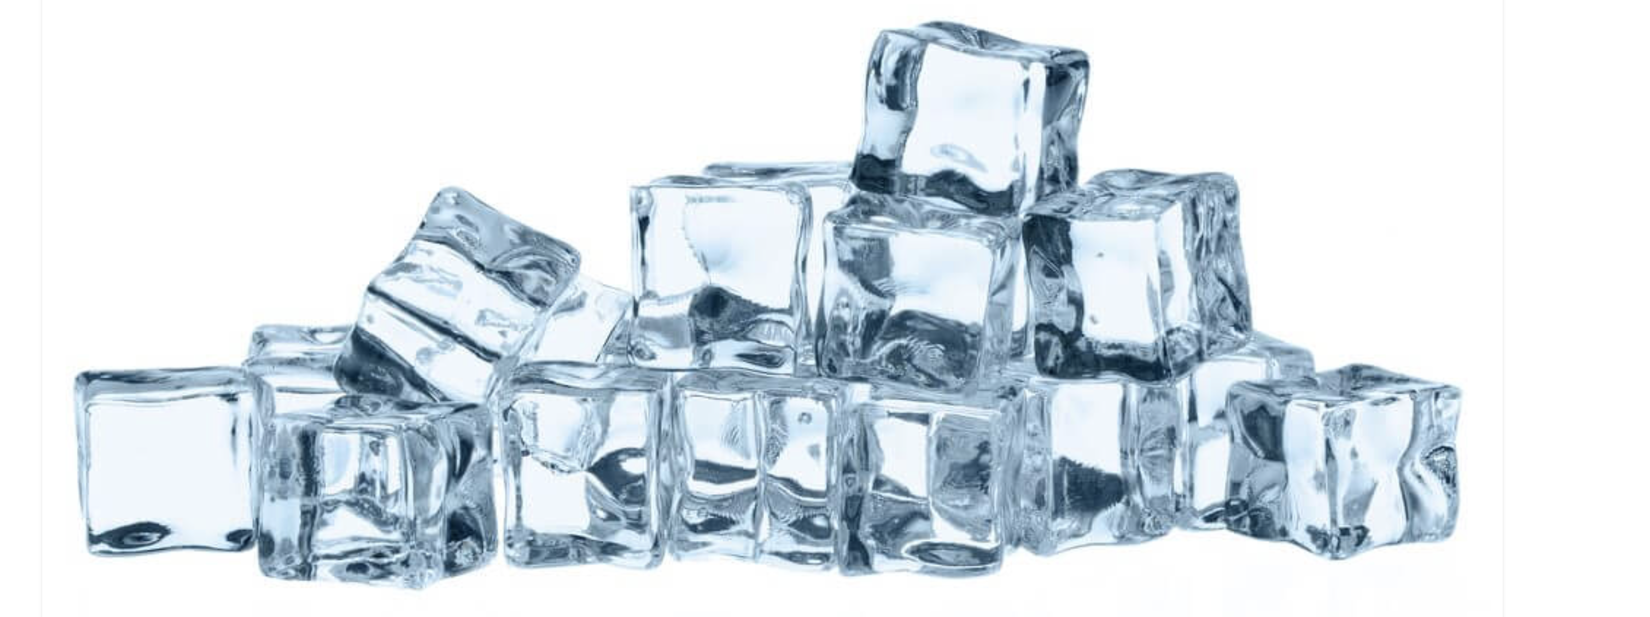 SALE OF ICE CUBES      